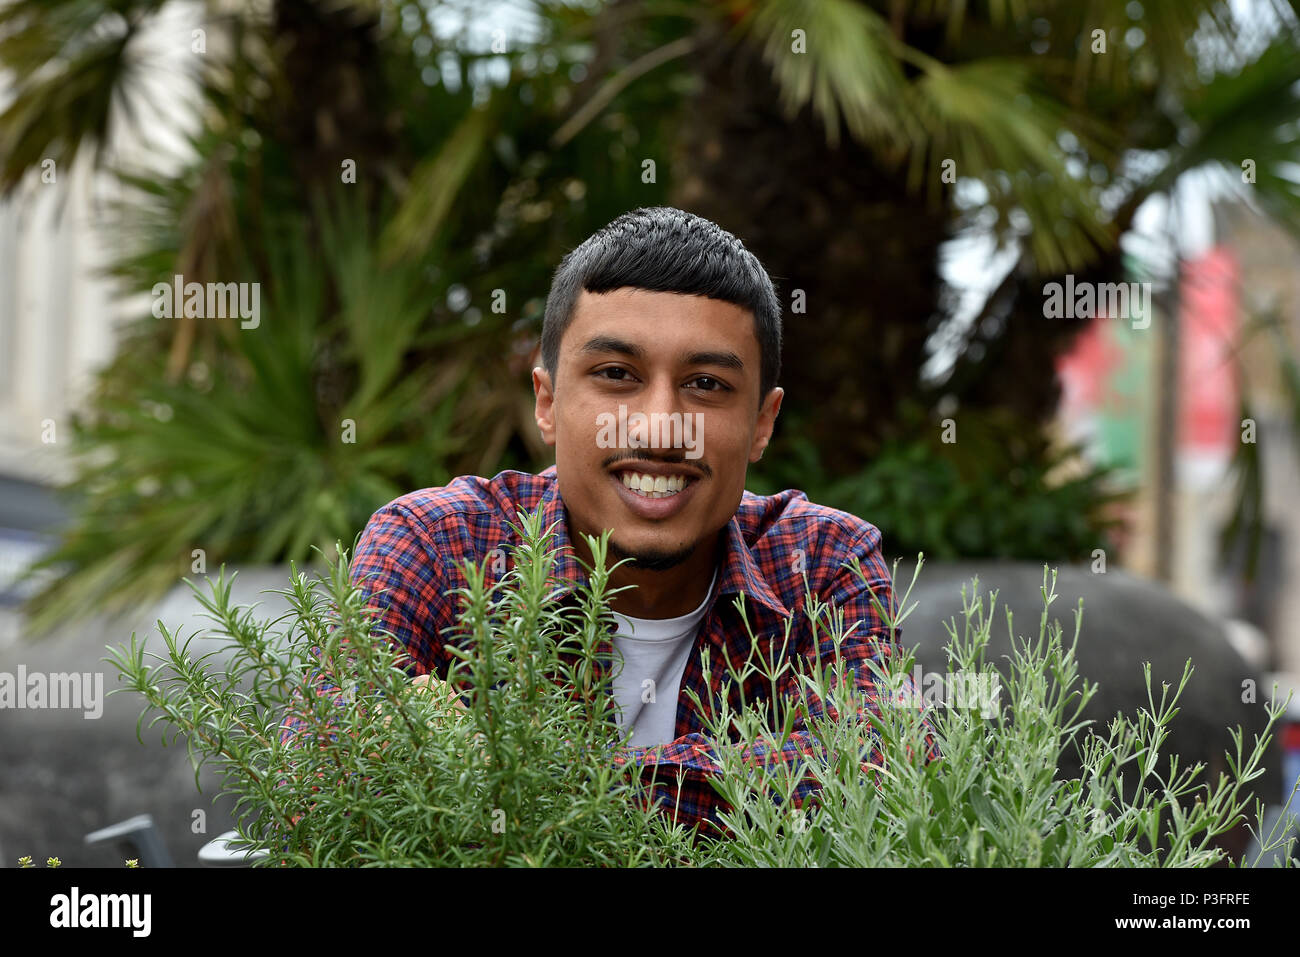 Pictures show Ibby Tarafdar, aged 27 years of Gabalfa, Cardiff. Ibby a graphic designer has been commissioned by Jay Z , but still works at Starbucks Stock Photo